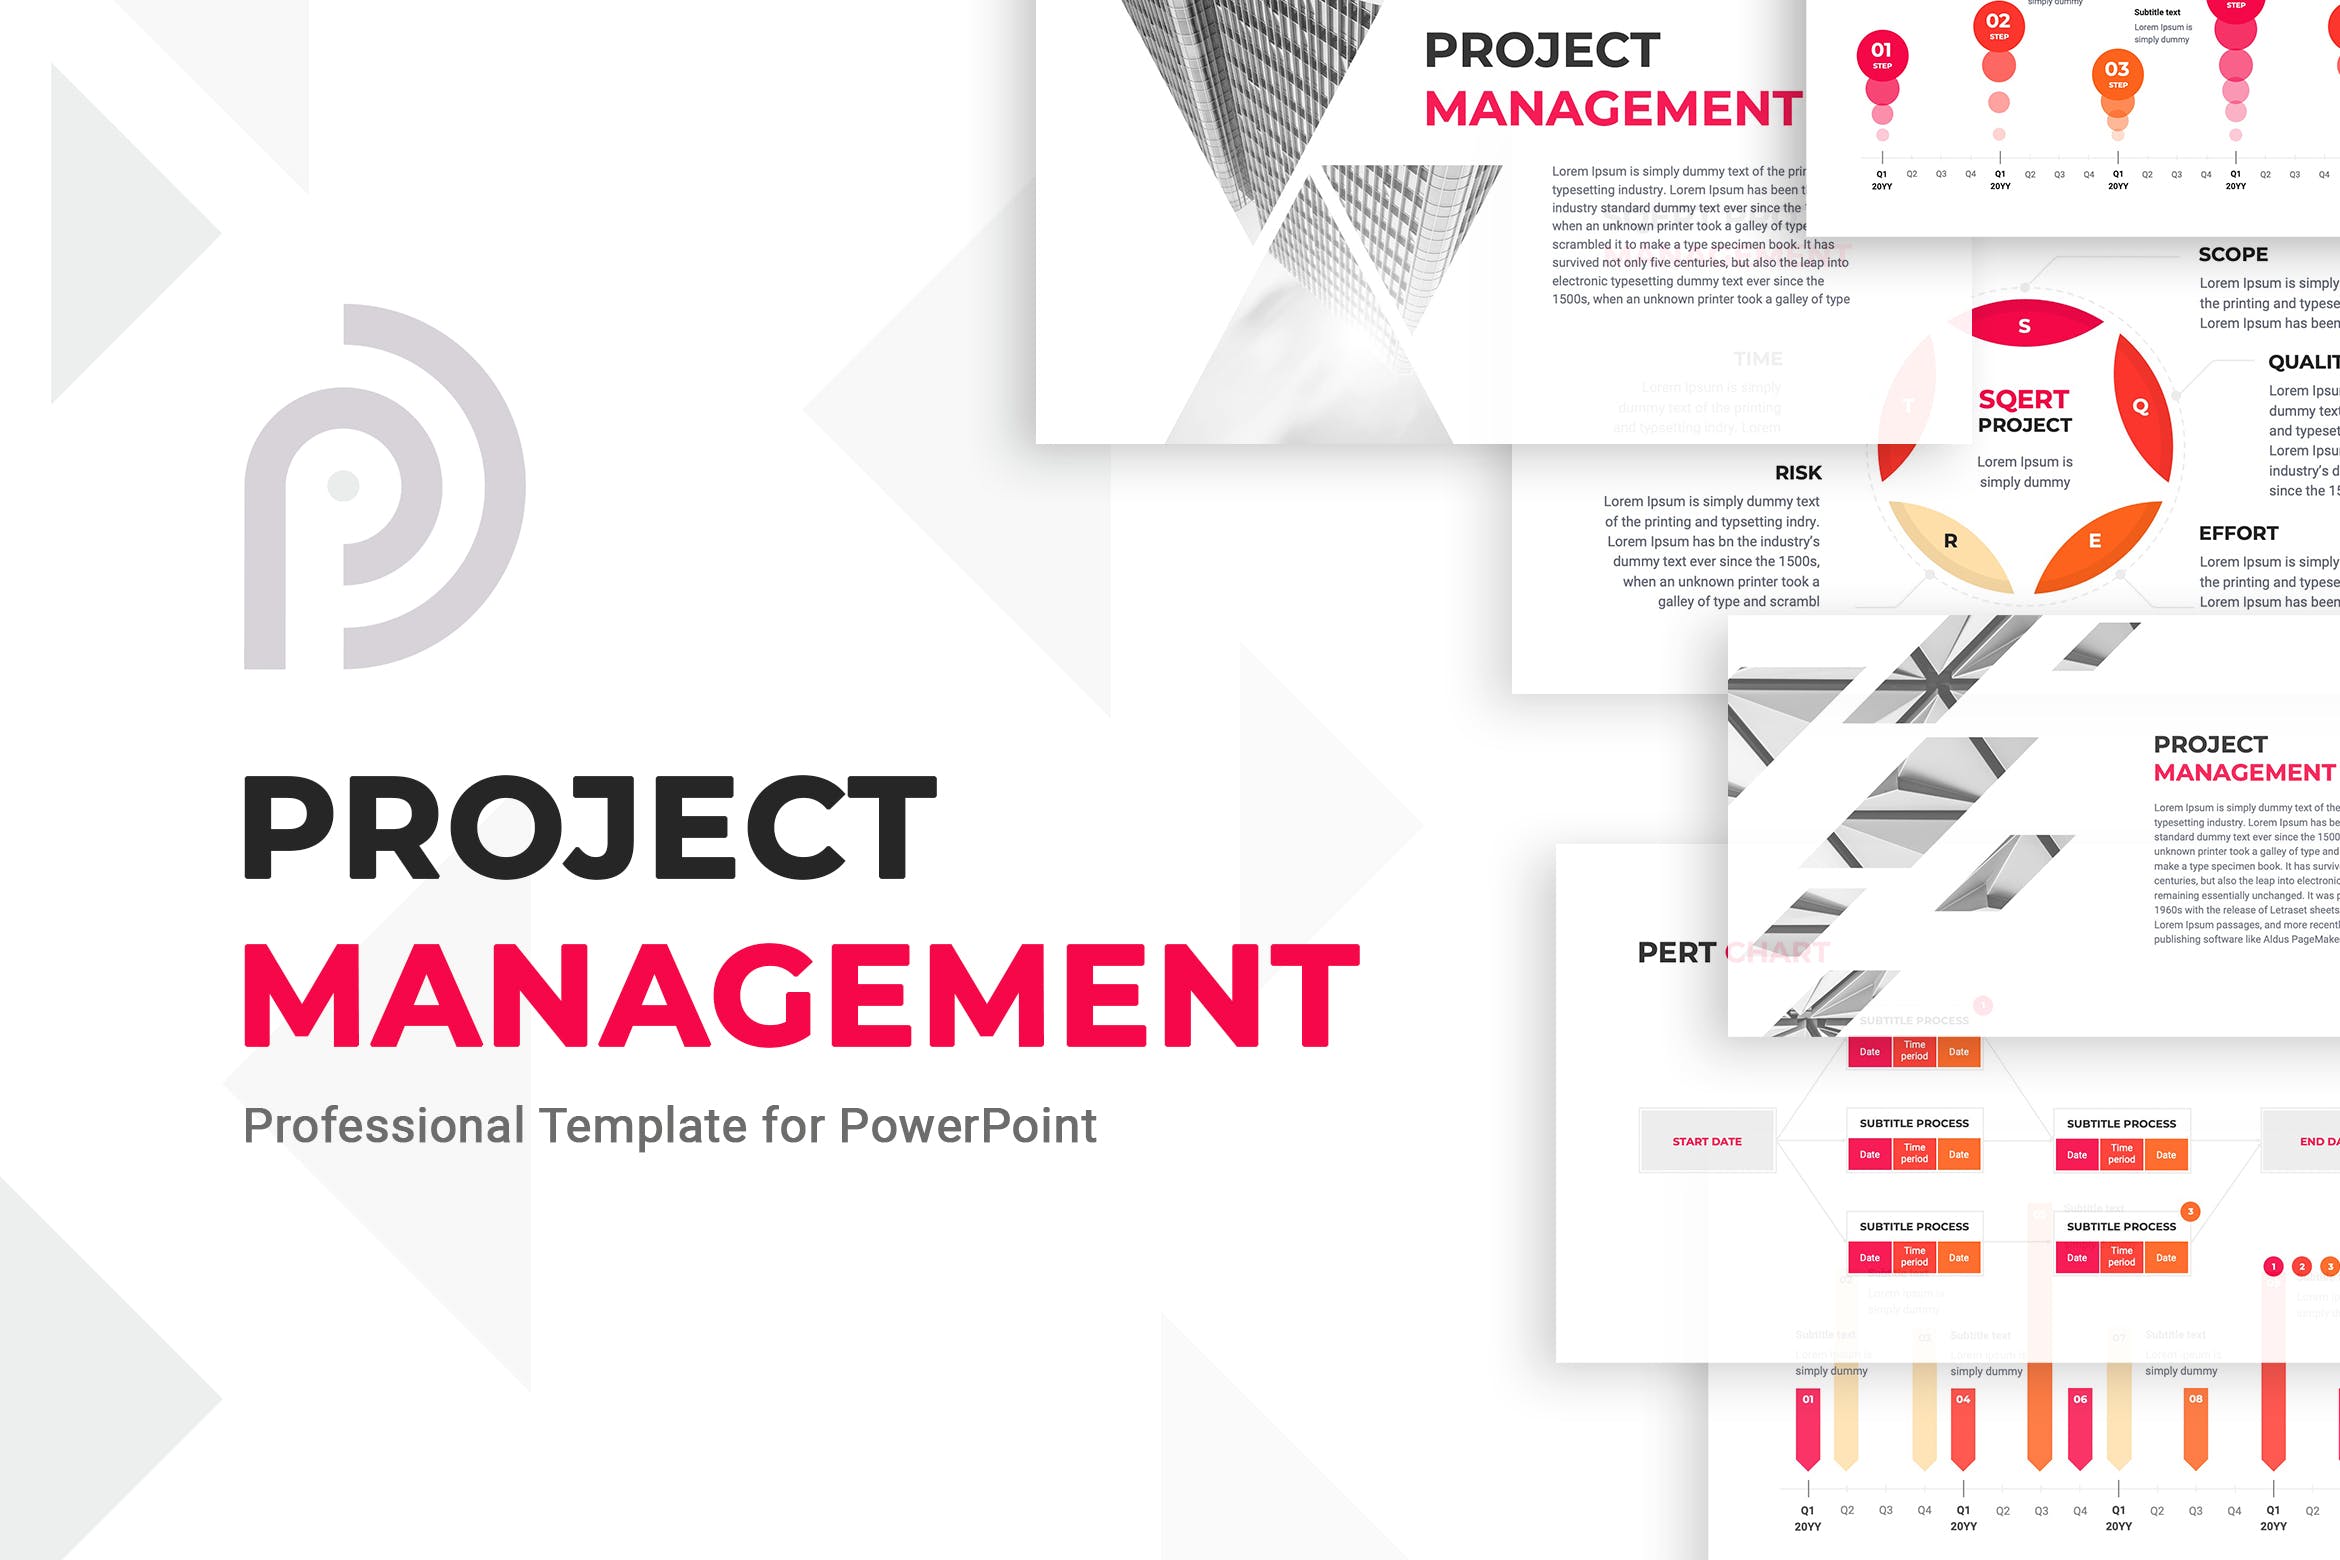 Cover image of Project Management PowerPoint.